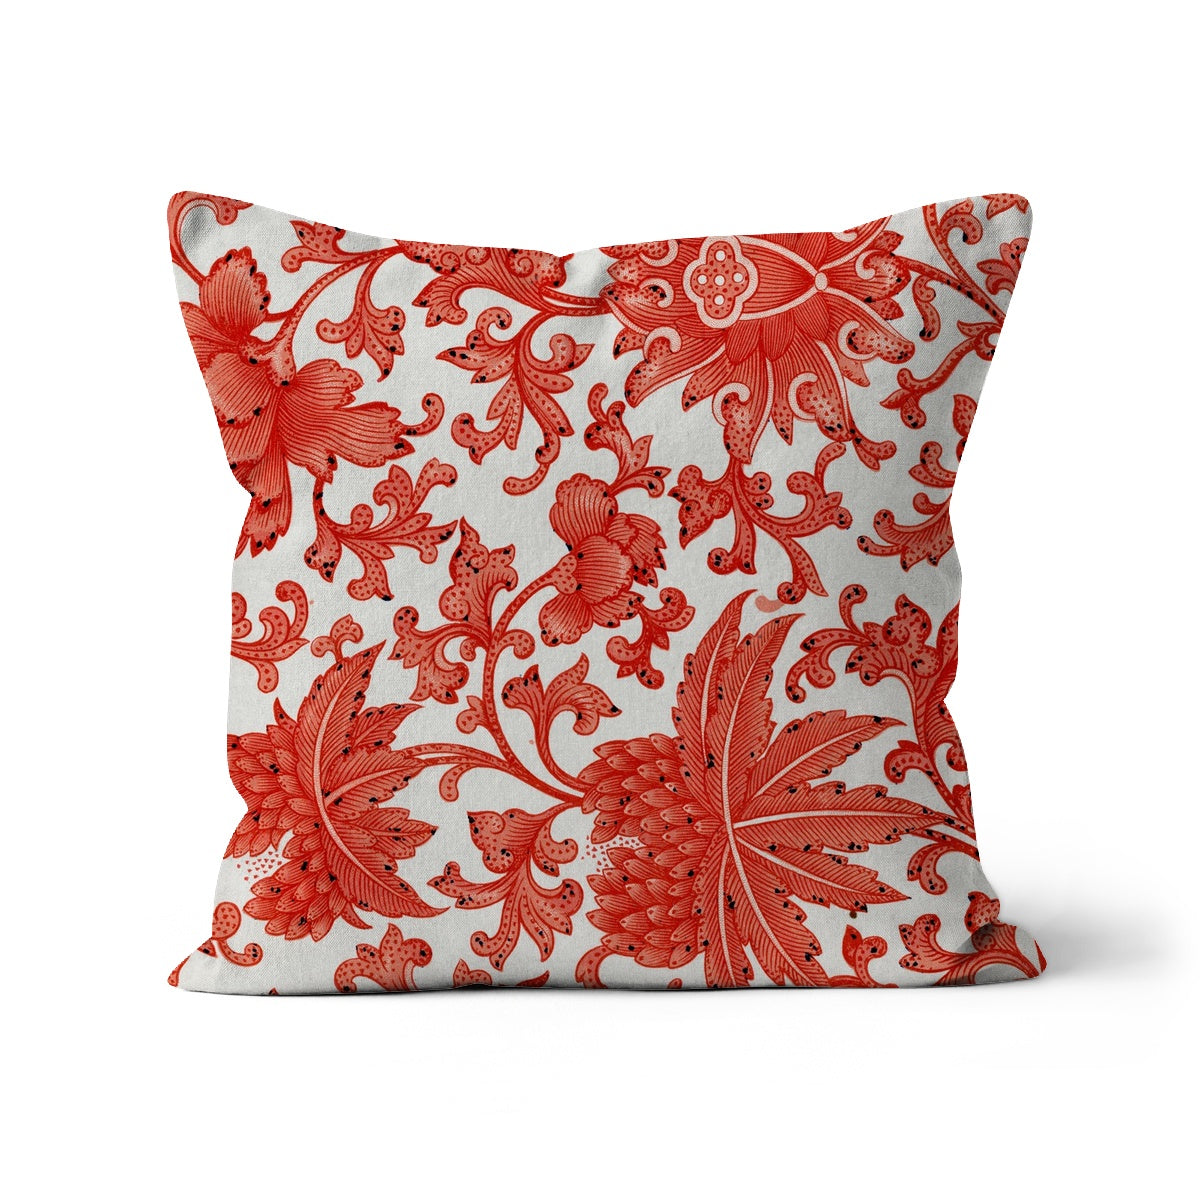 red chinosierie cushion cover in white and red, square cushion cover.  